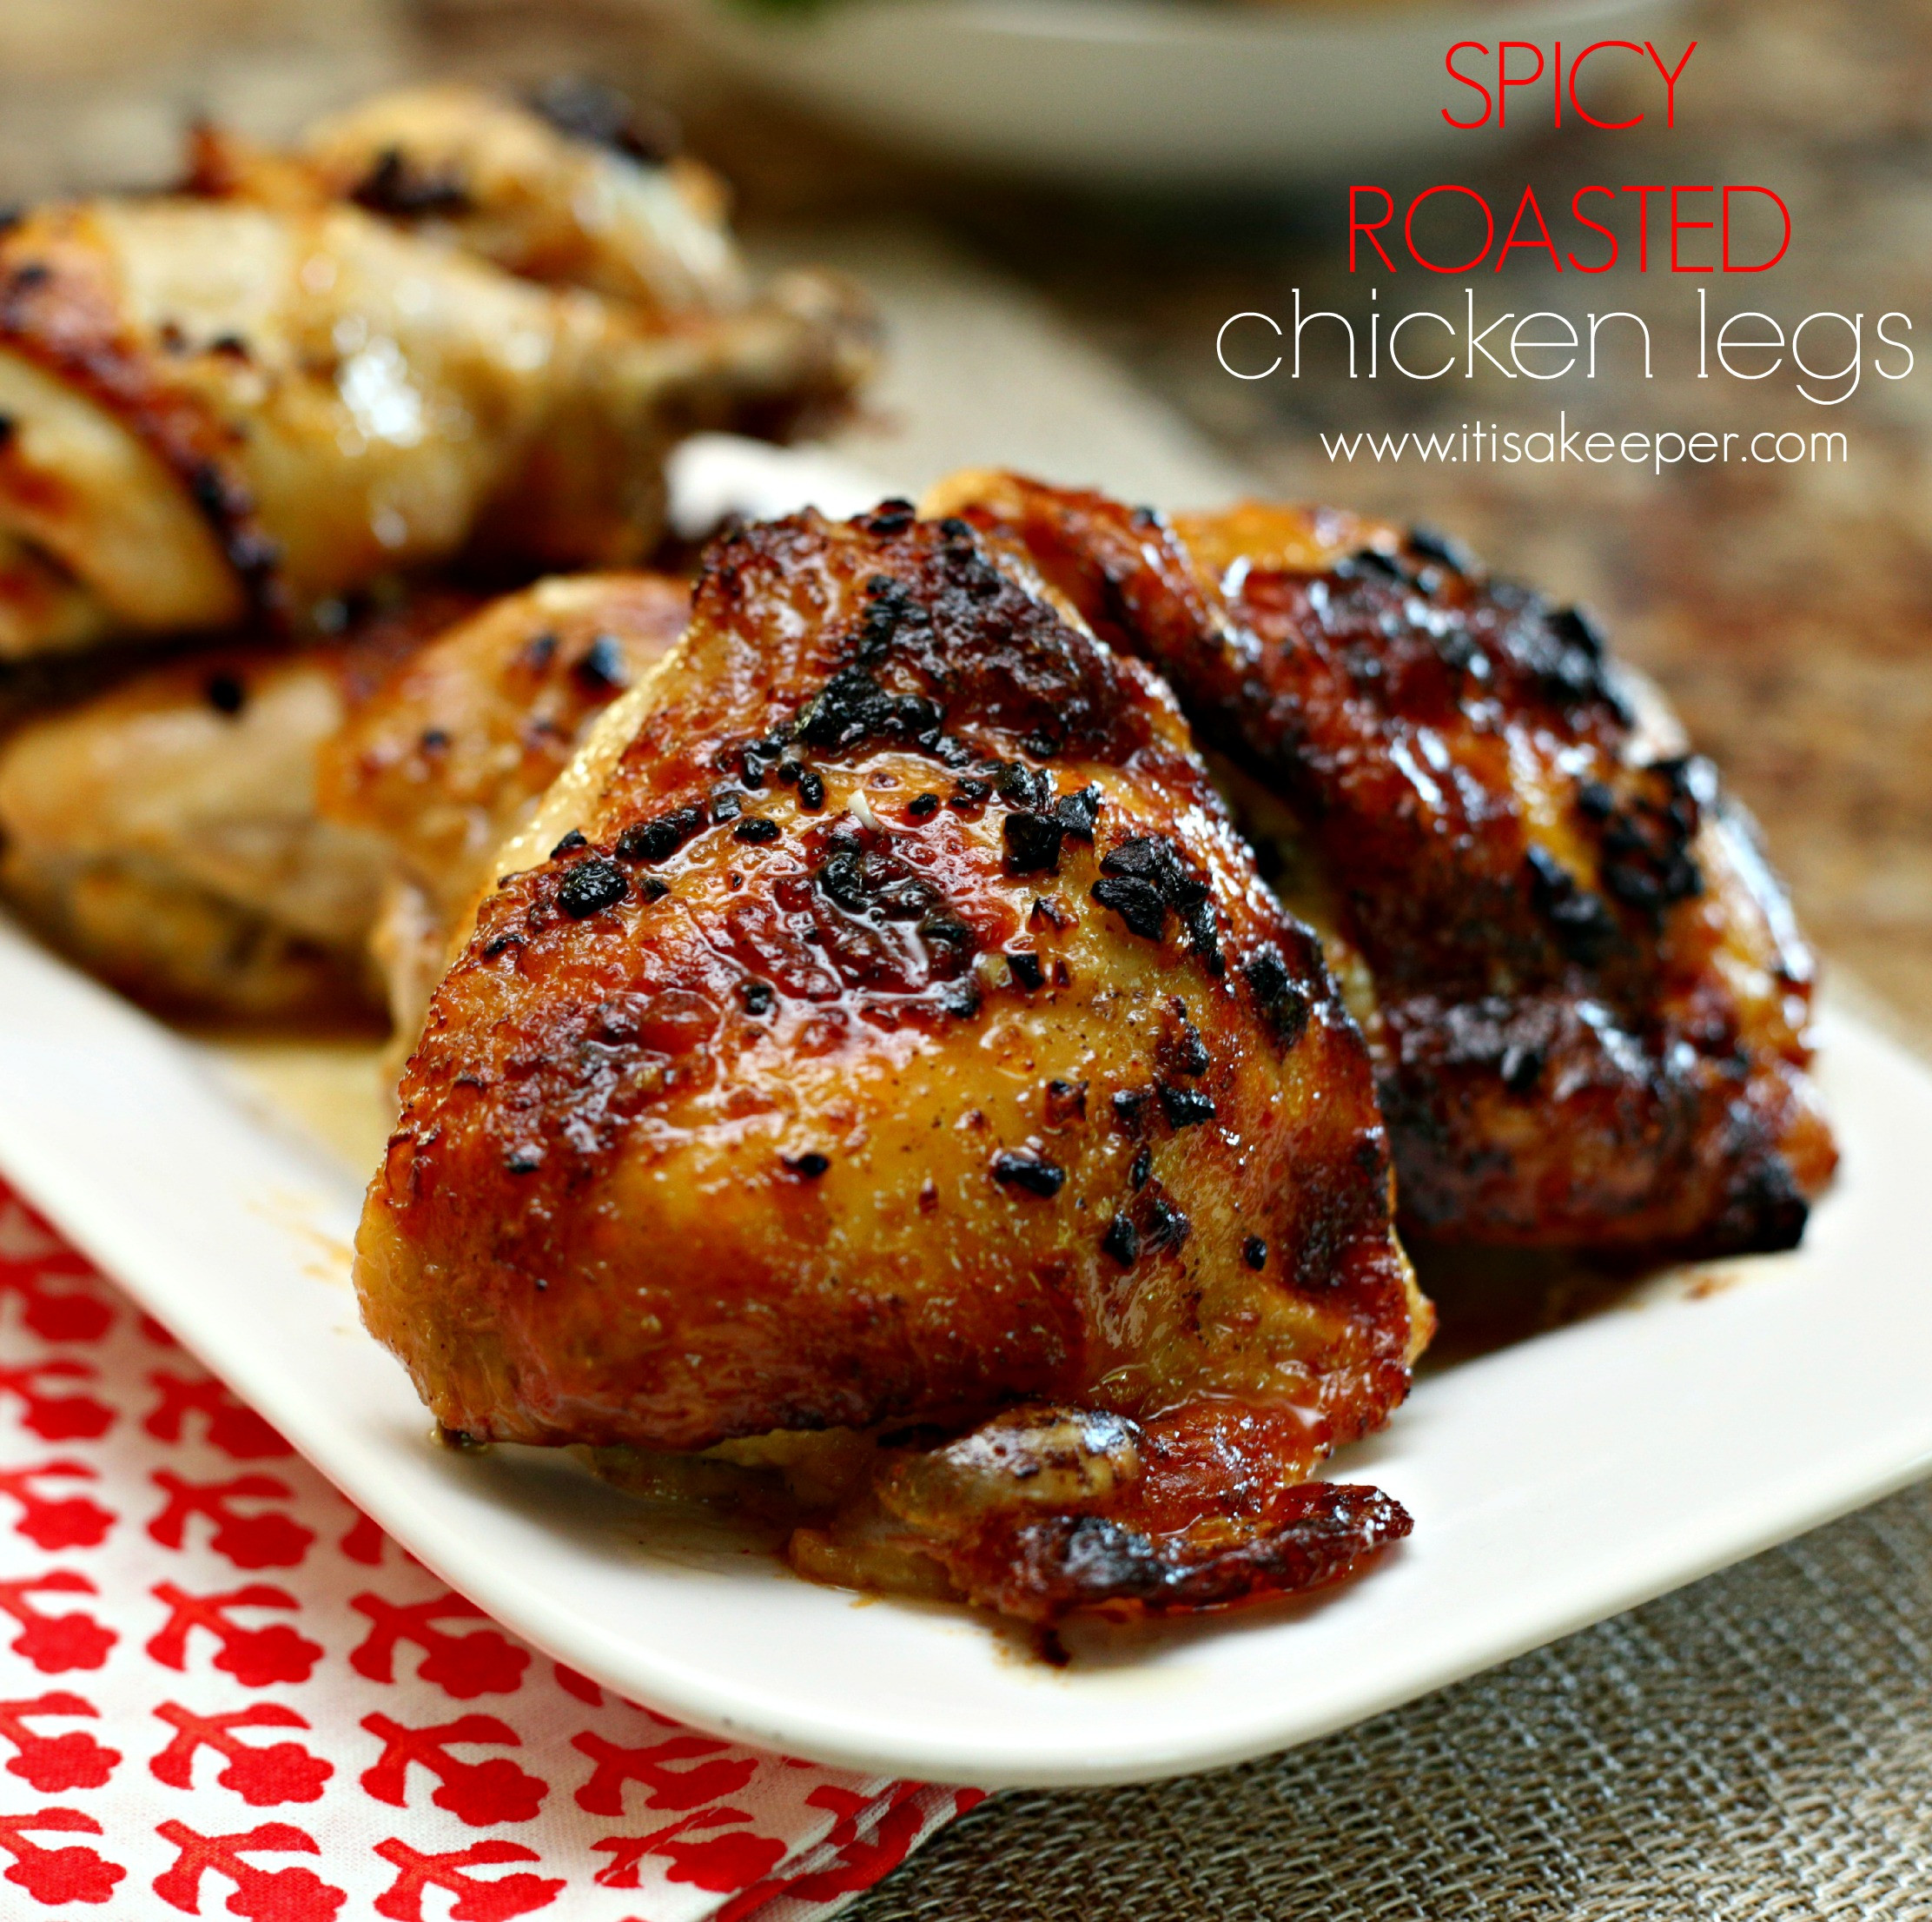 Quick Chicken Legs Recipes
 Super Easy Recipes Spicy Roasted Chicken Legs